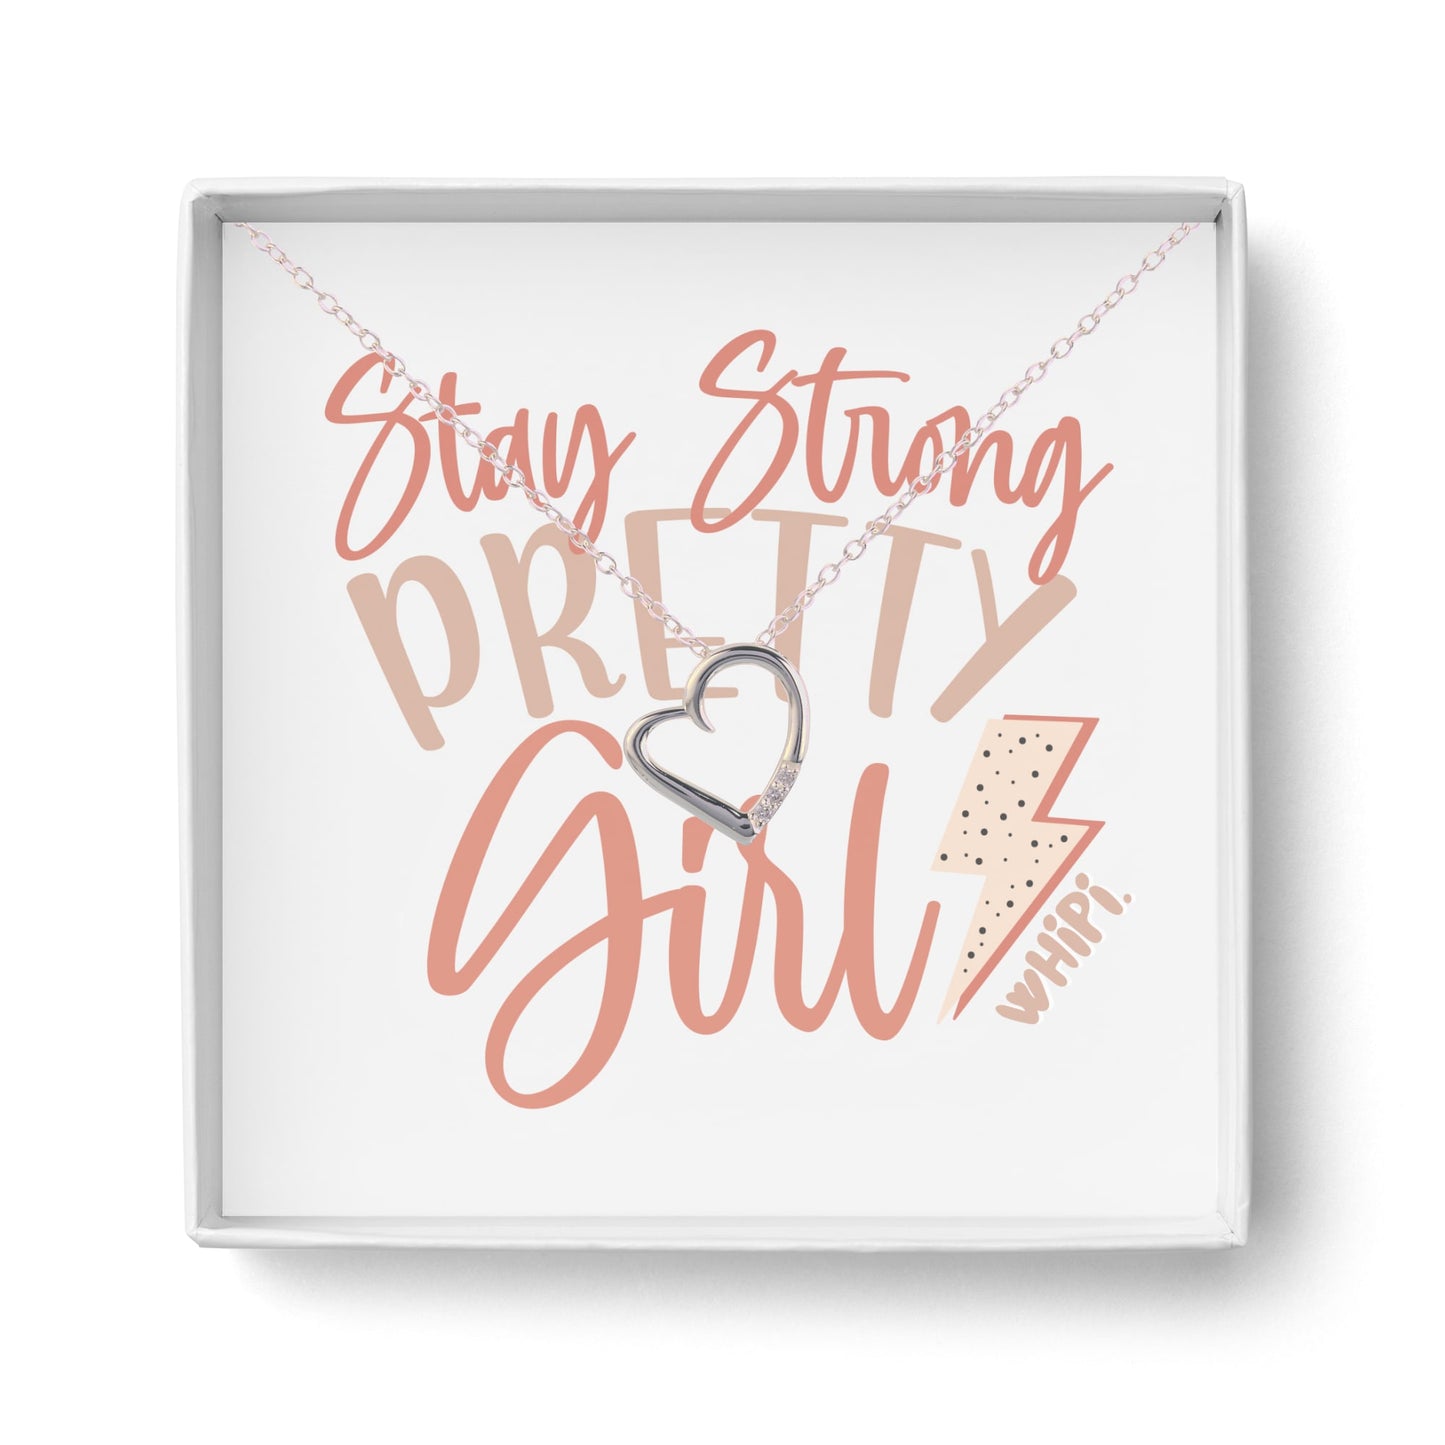 Silver Heart Pendant Necklace - Stay Strong